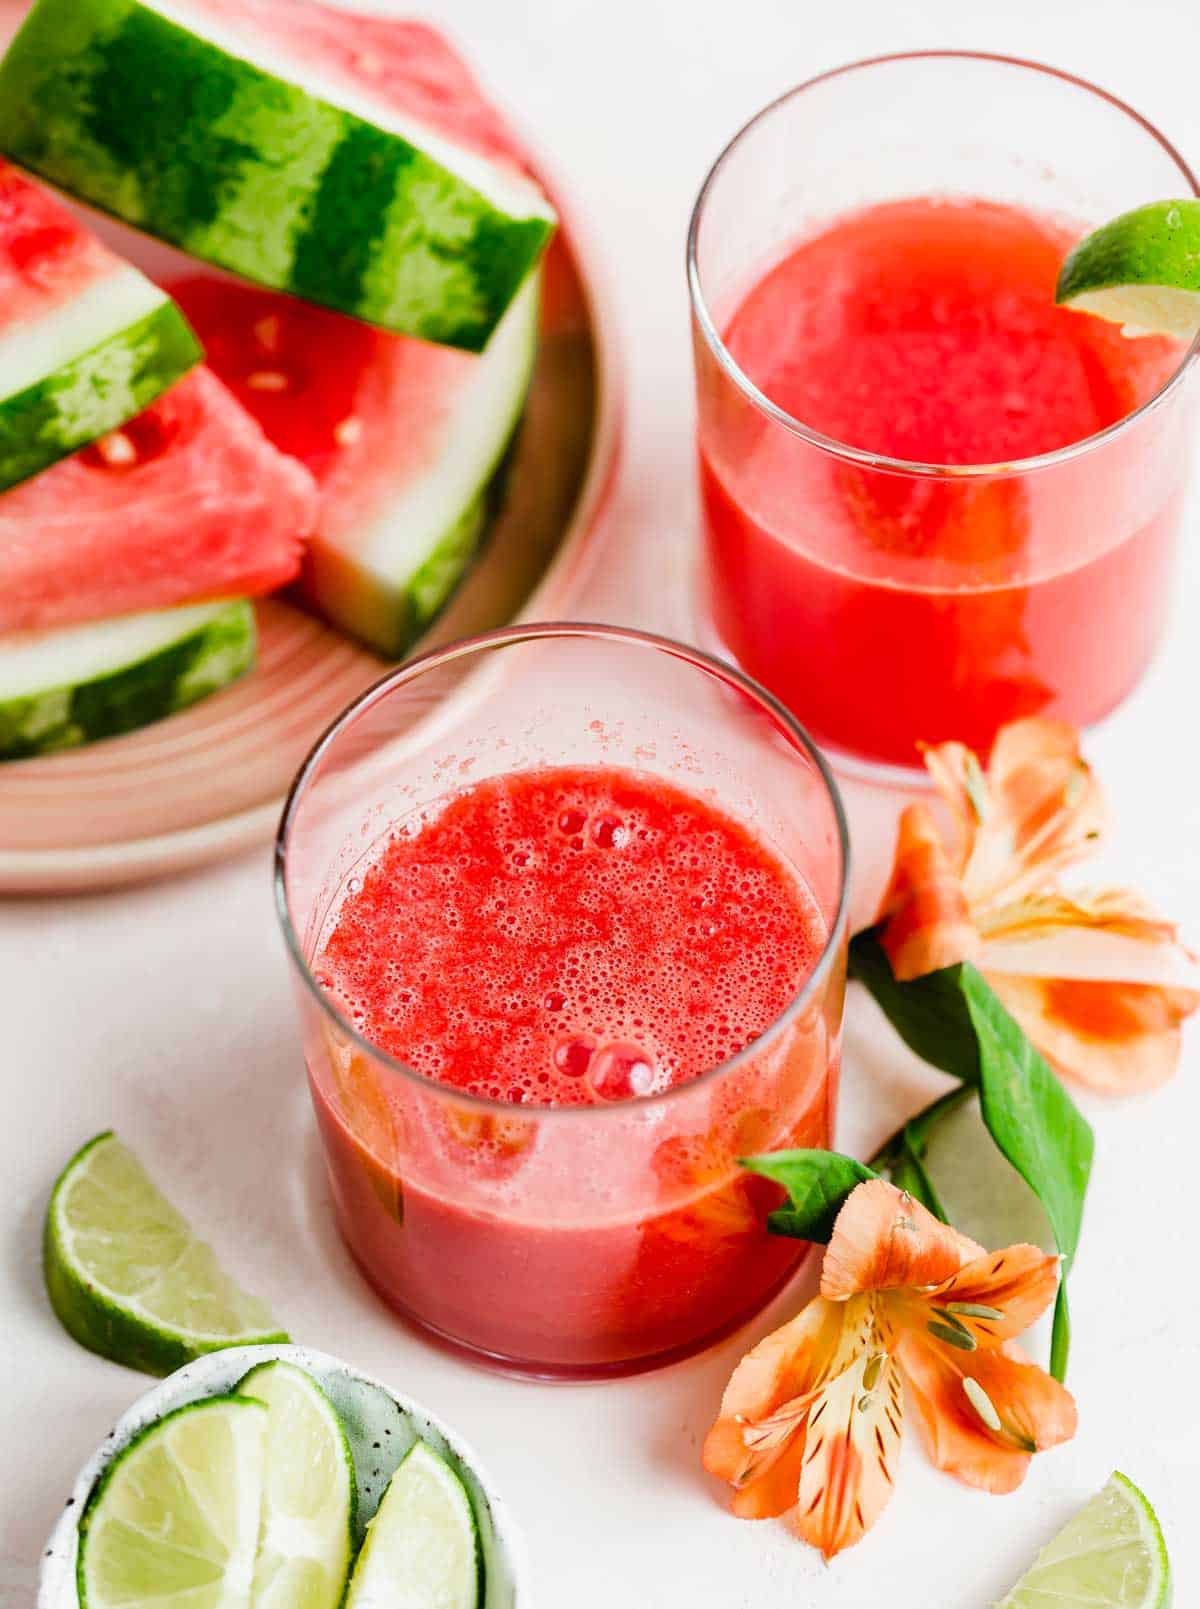 Watermelon Juice in glass cups on a light peach colored background.